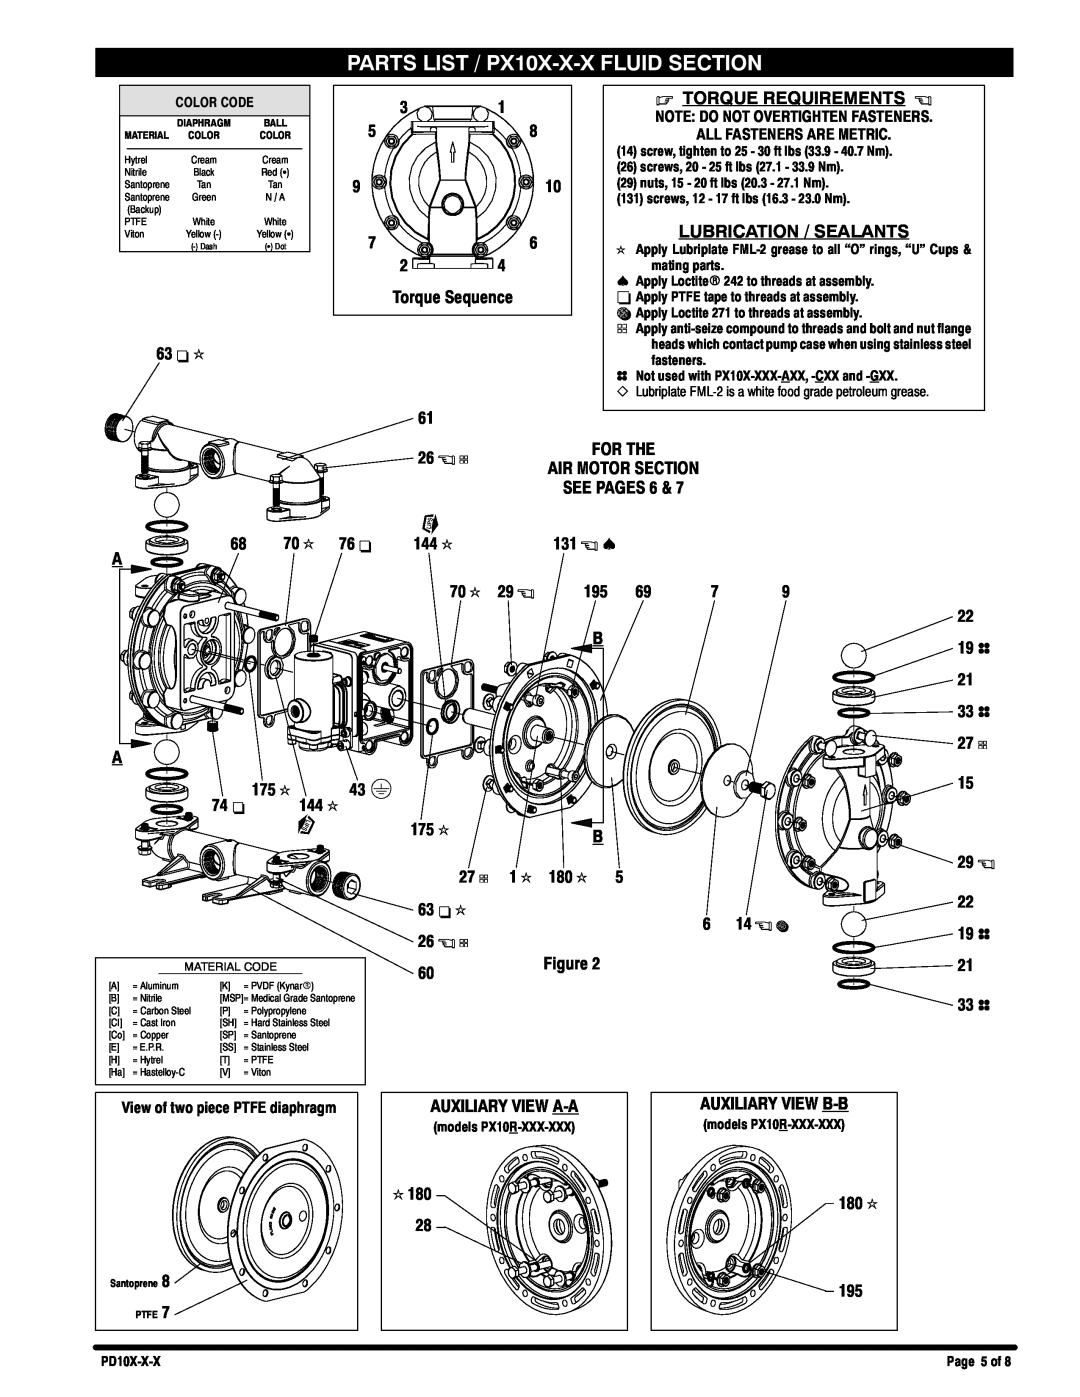 Ingersoll-Rand PE10X-X-X manual Torque Requirements, Lubrication / Sealants, PARTS LIST / PX10X-X-X FLUID SECTION, For The 